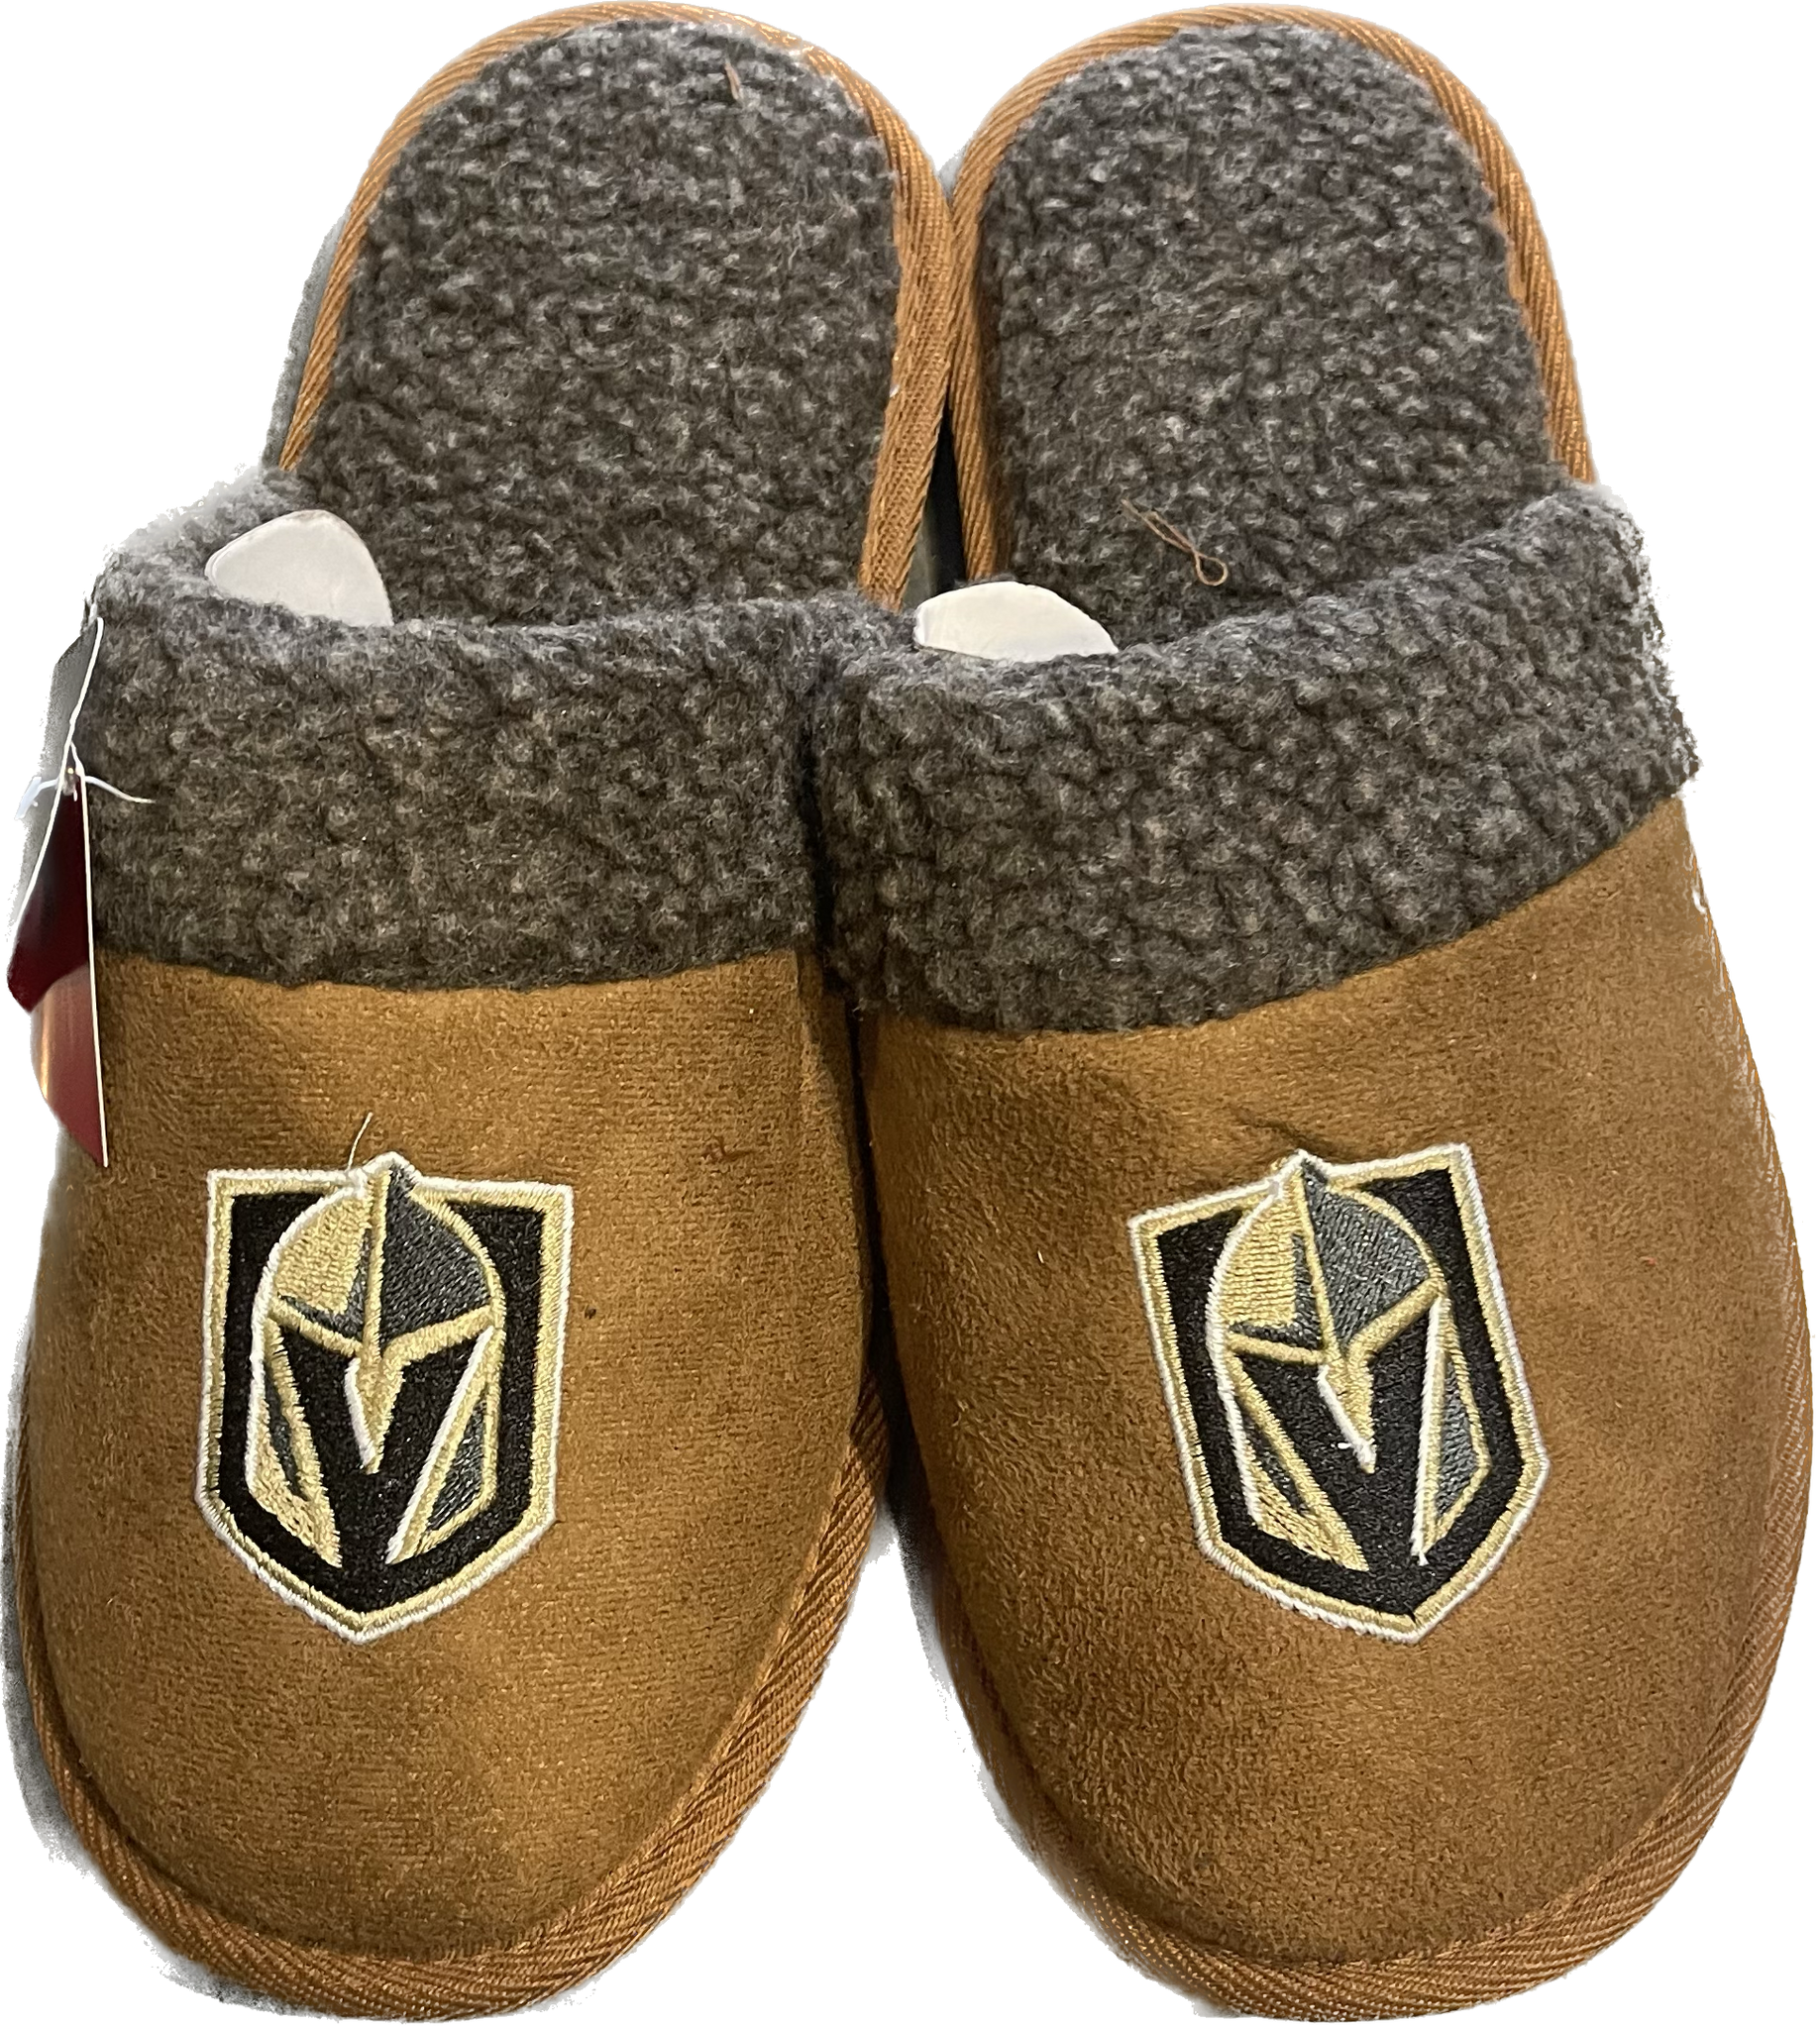 Vegas Golden Knights Sherpa Lined Slippers